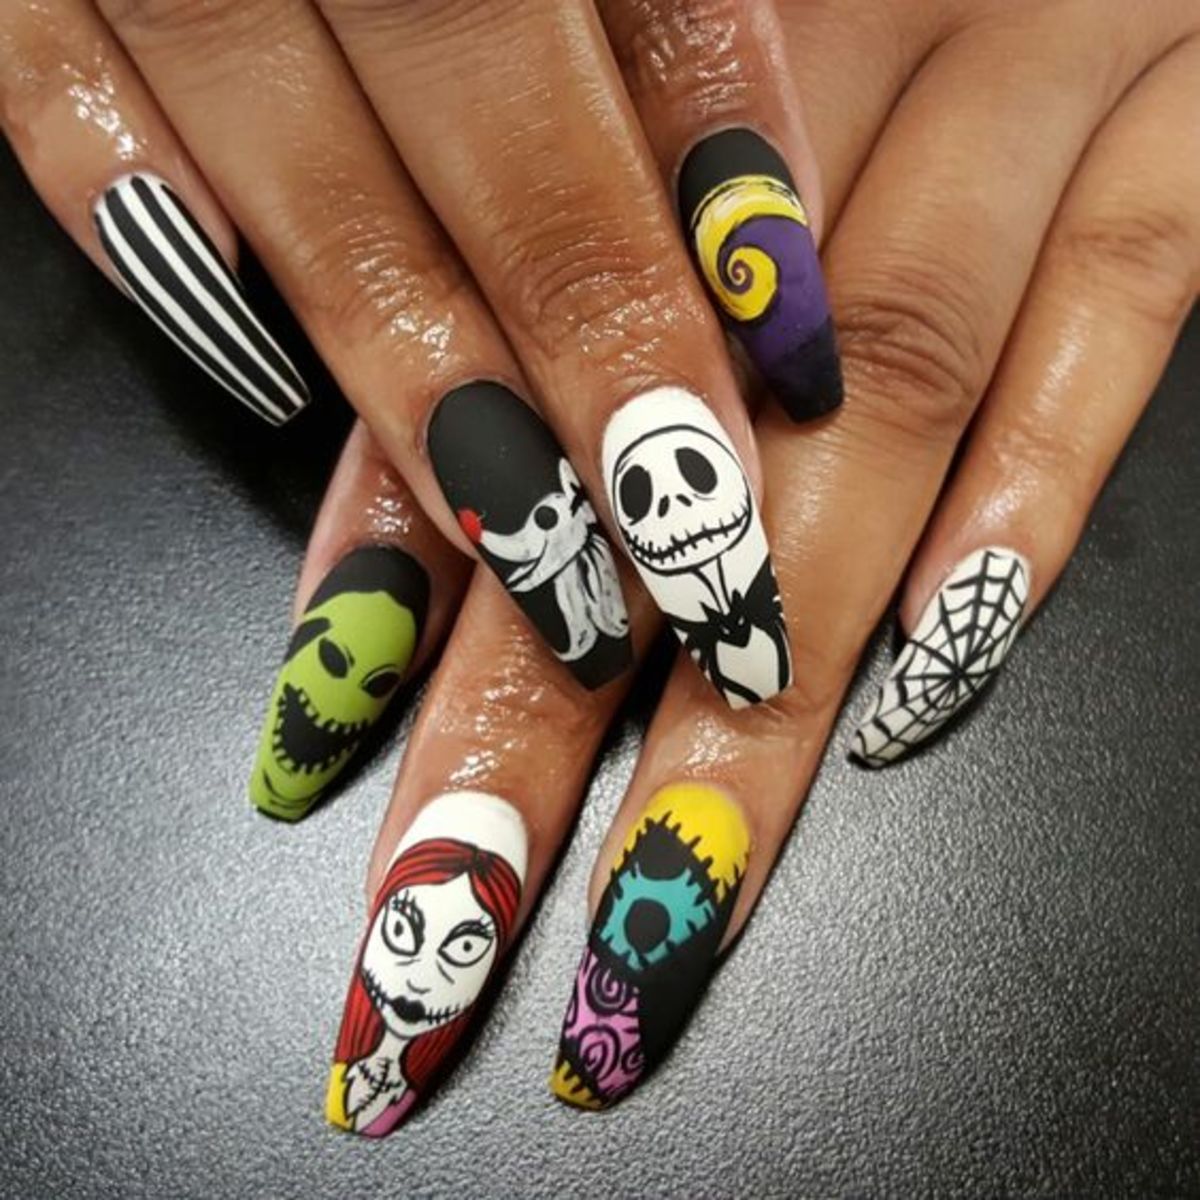 "Nightmare Before Christmas" nails